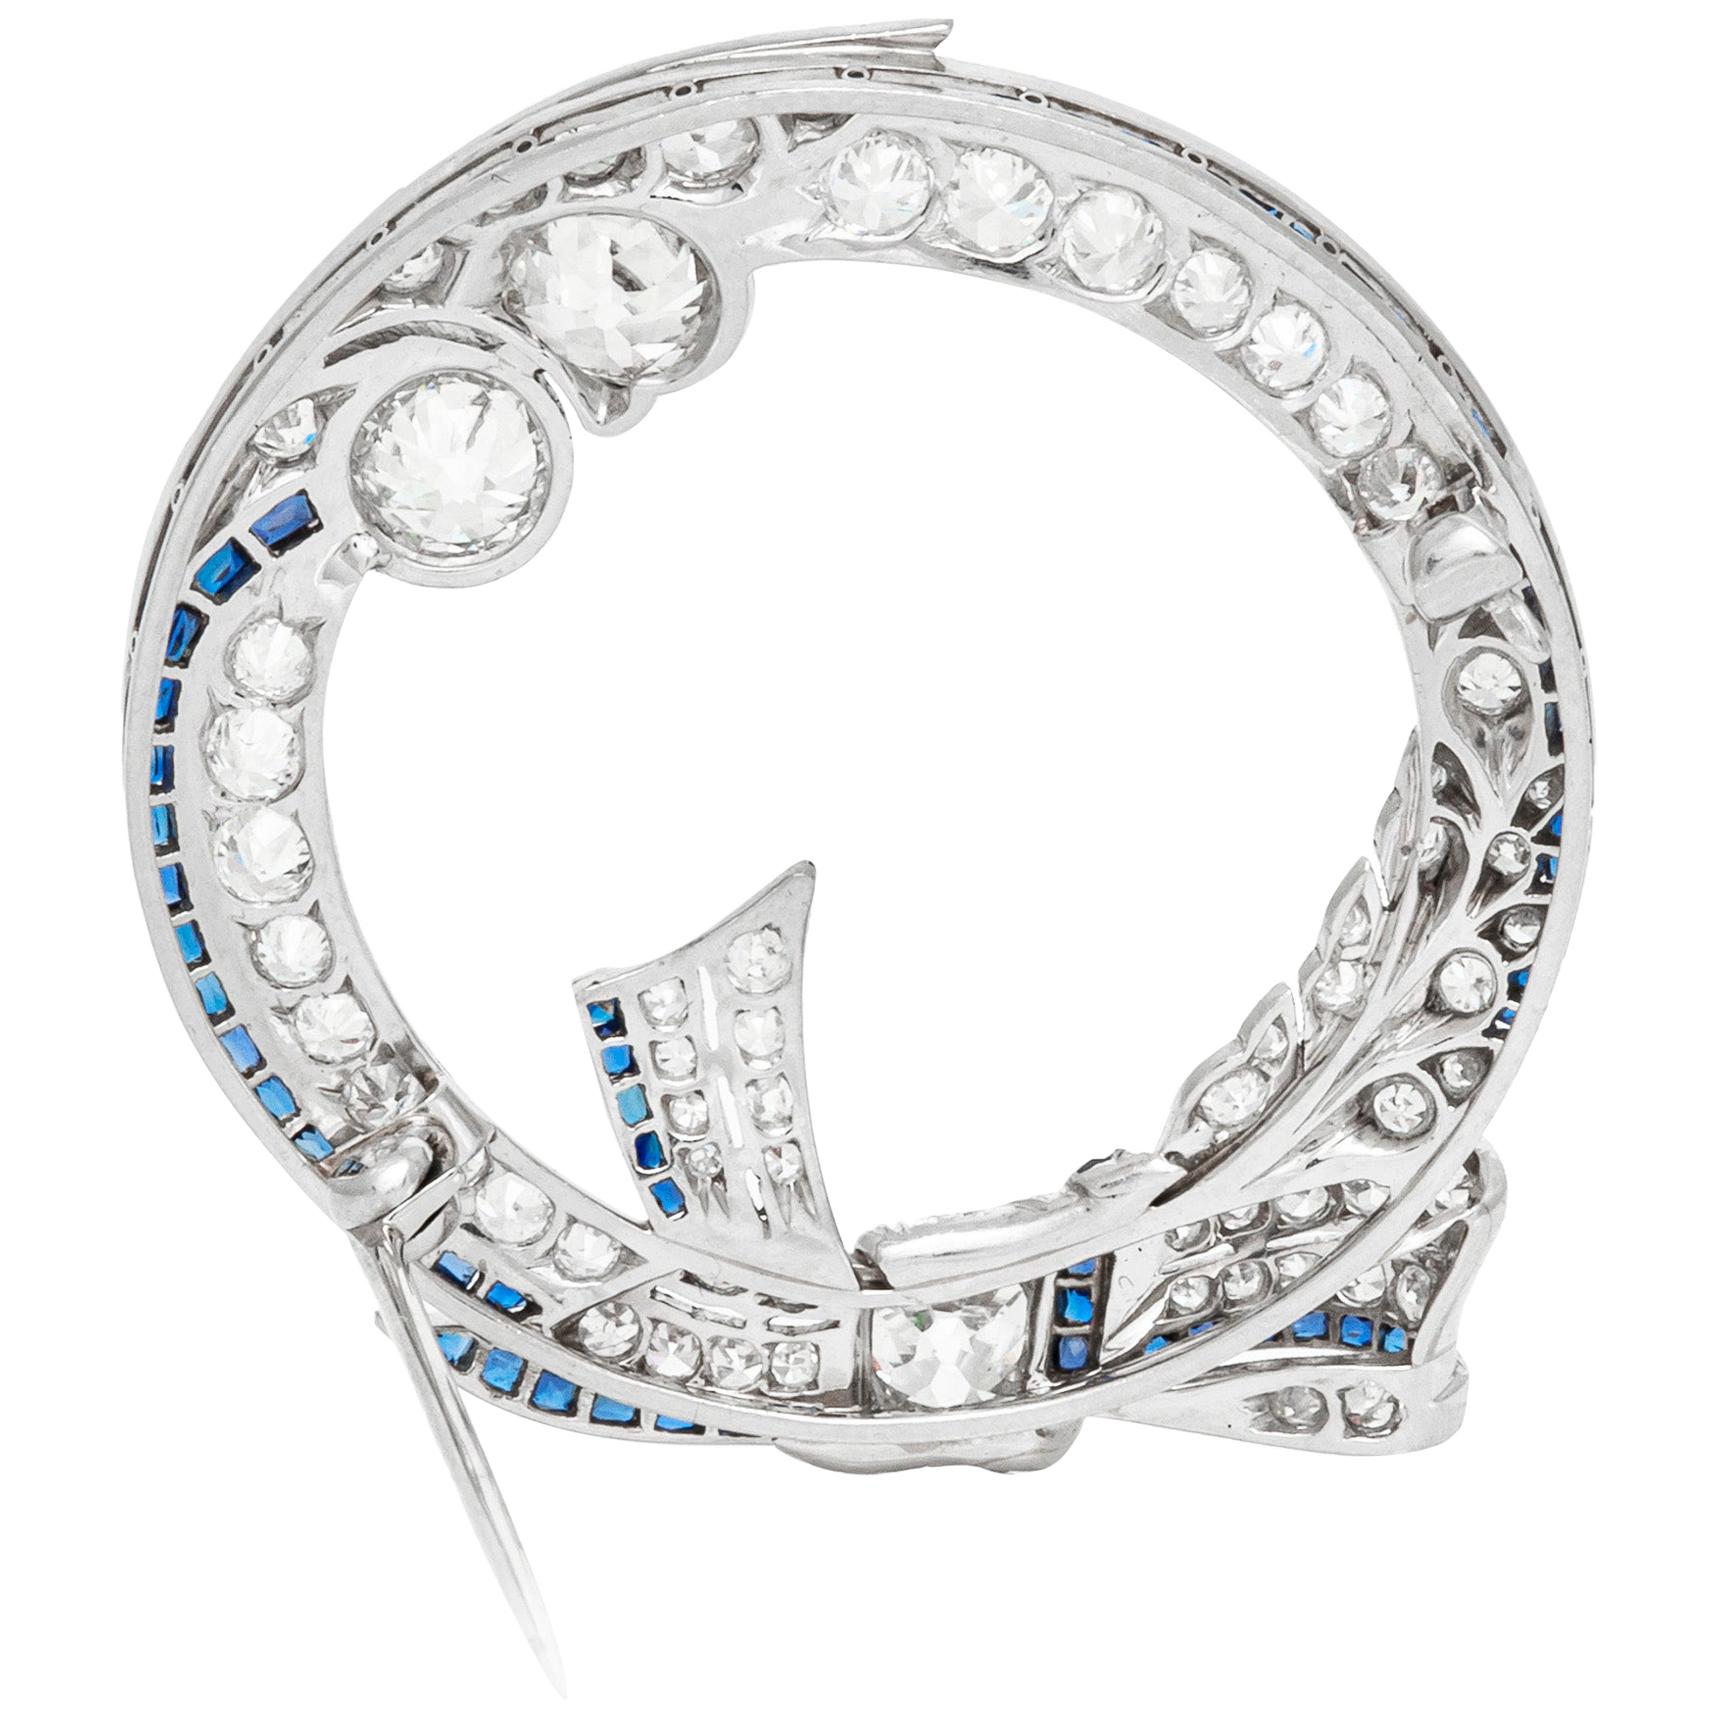 Platinum Circle with Bow Tie with Diamond and Sapphire